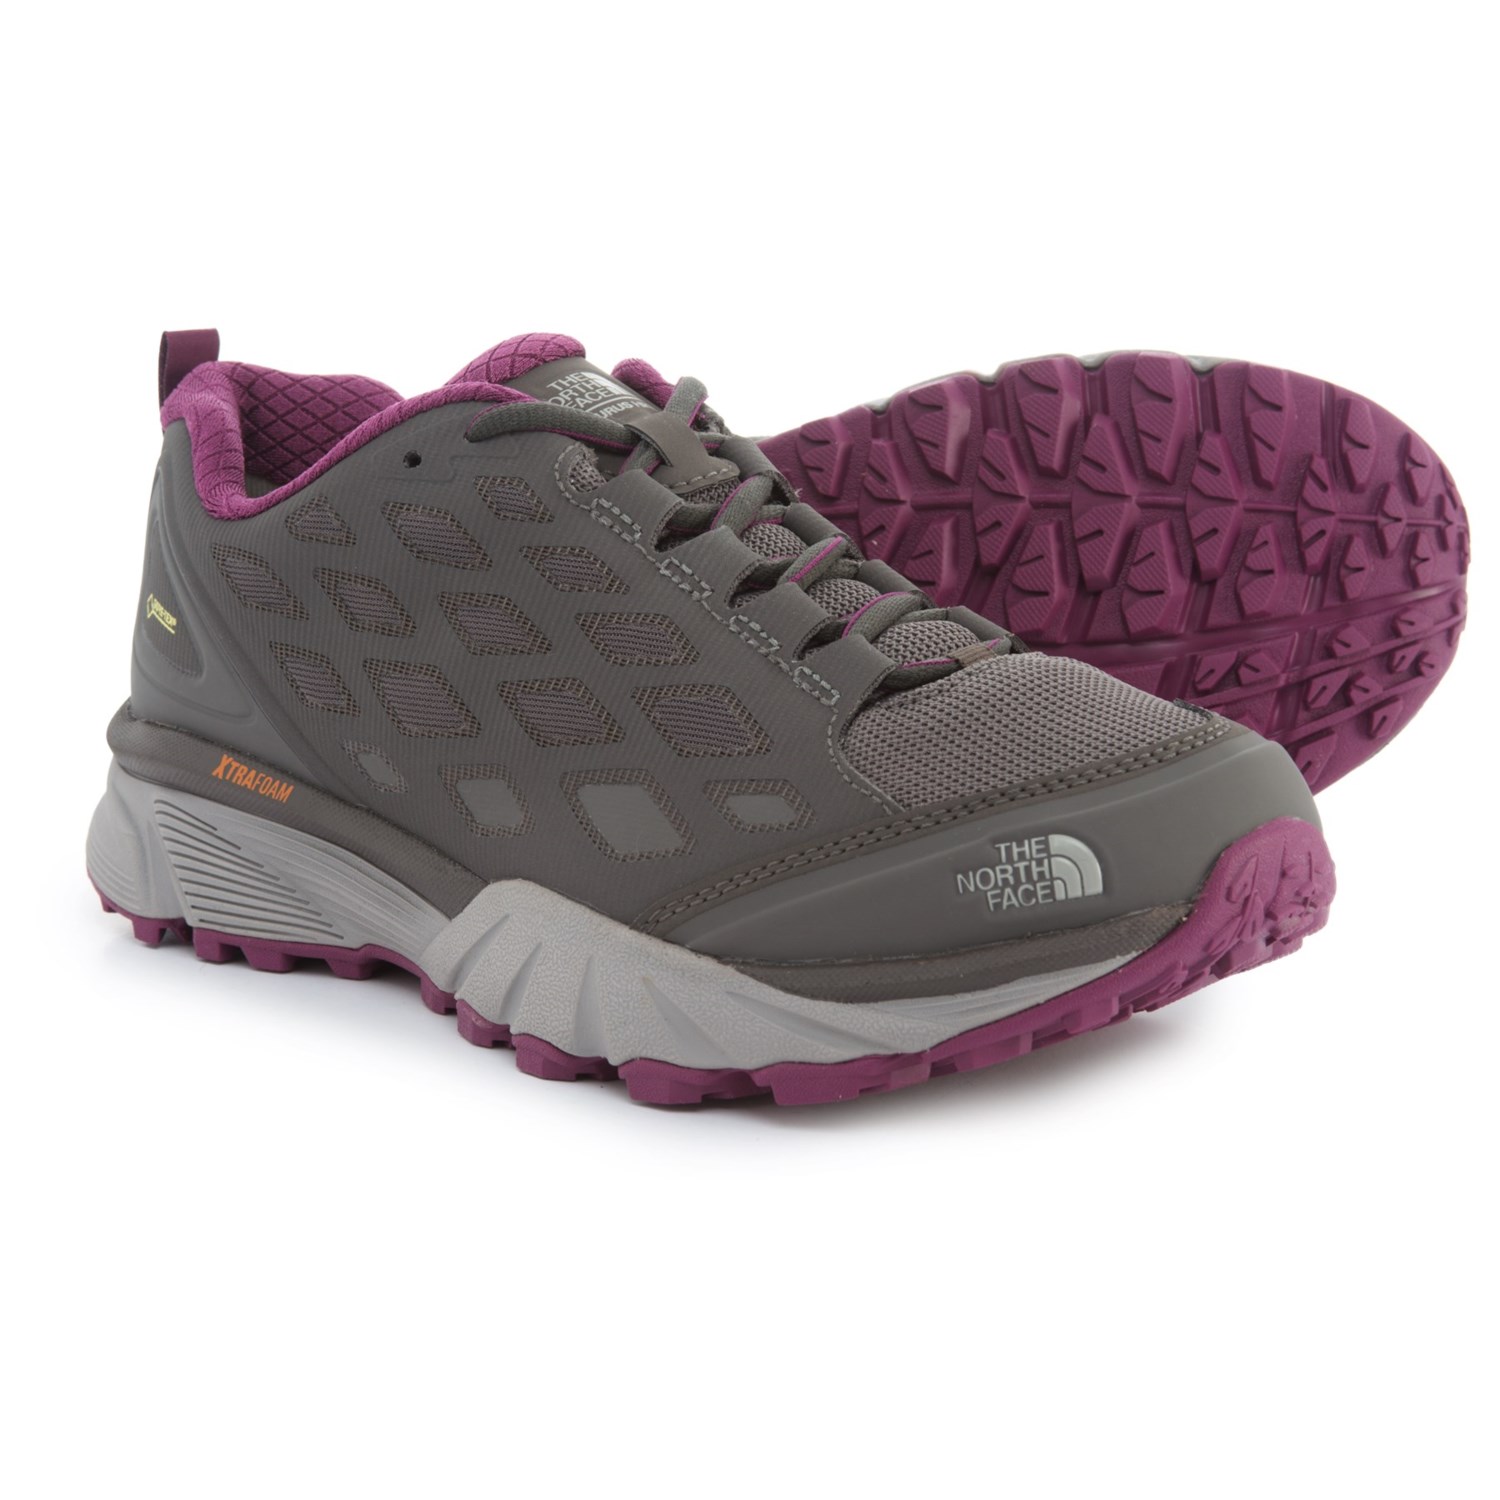 The North Face Endurus Hike Gore-Tex® Hiking Shoes – Waterproof (For Women)